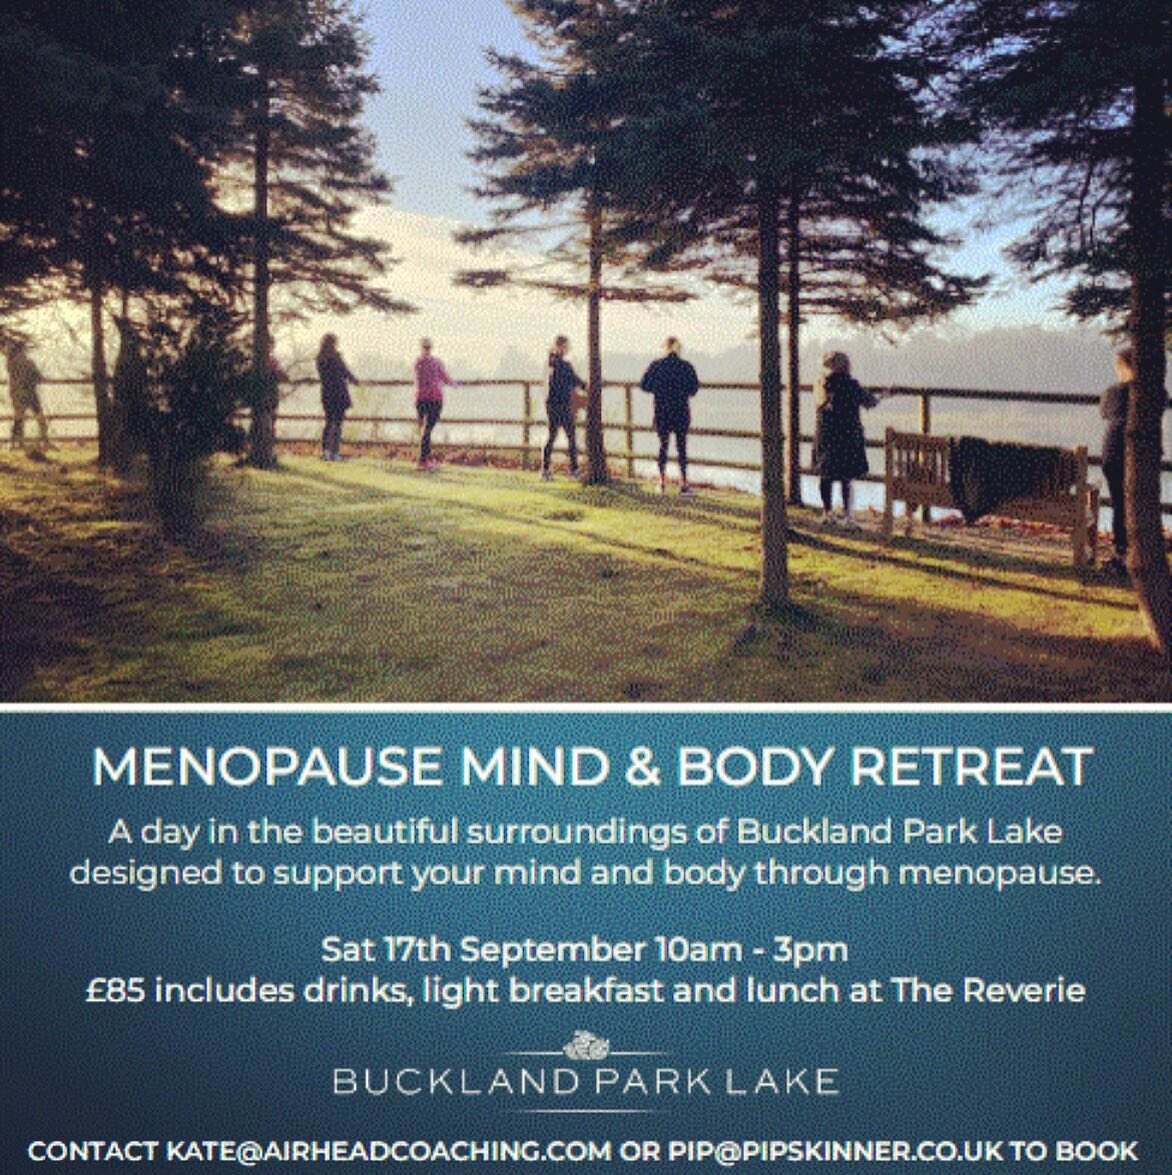 FEW SPACES REMAINING!

Please reserve your space now to join this growing community of wonder women on their journey through menopause.

You will have a day spent learning, sharing, talking and exercising with women who understand.

Bring a friend or